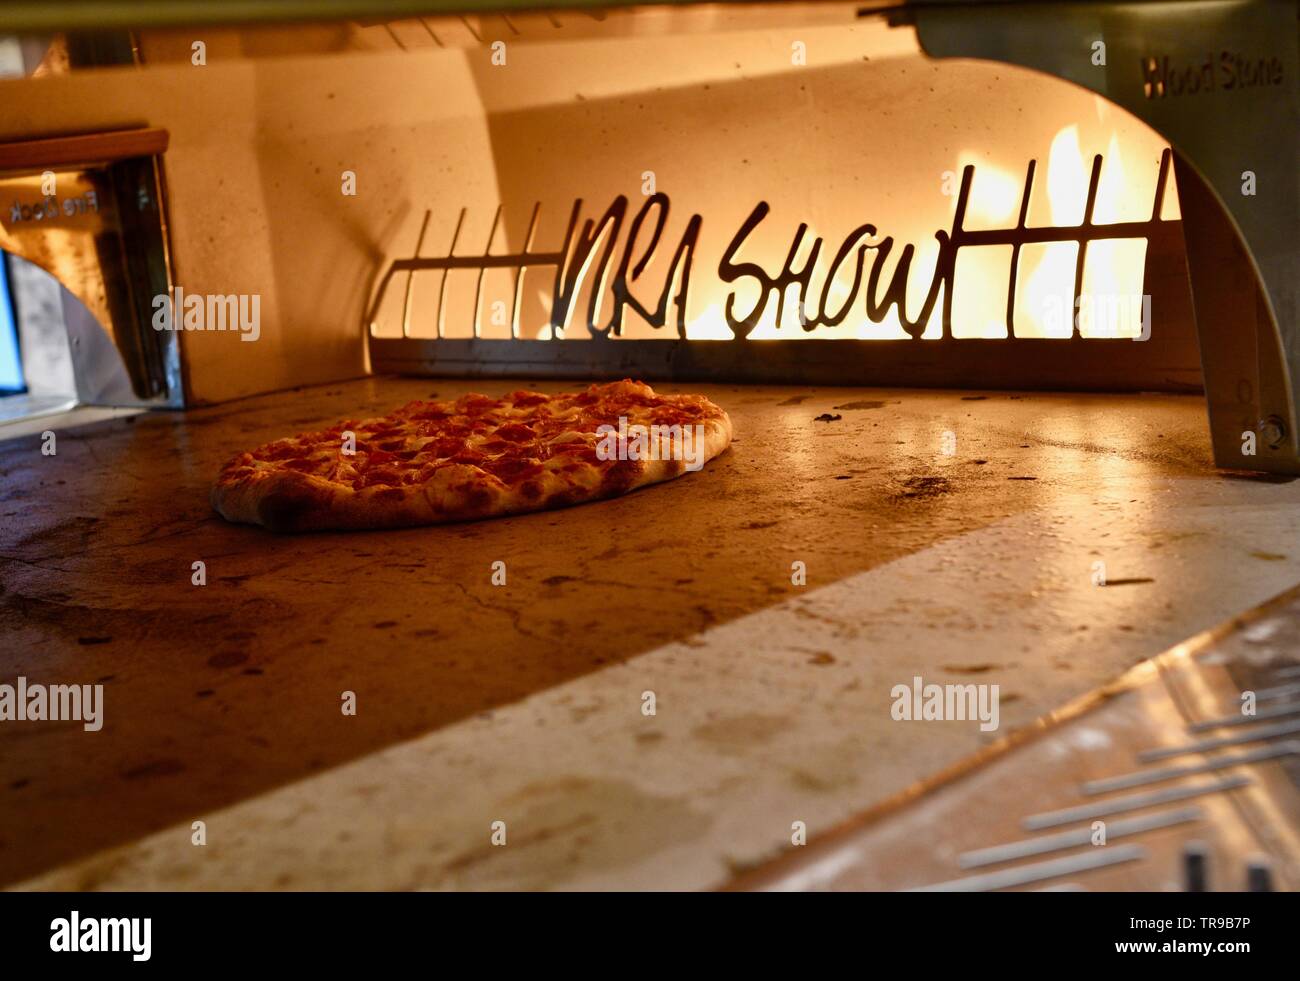 Pizza Booth High Resolution Stock and Images Alamy